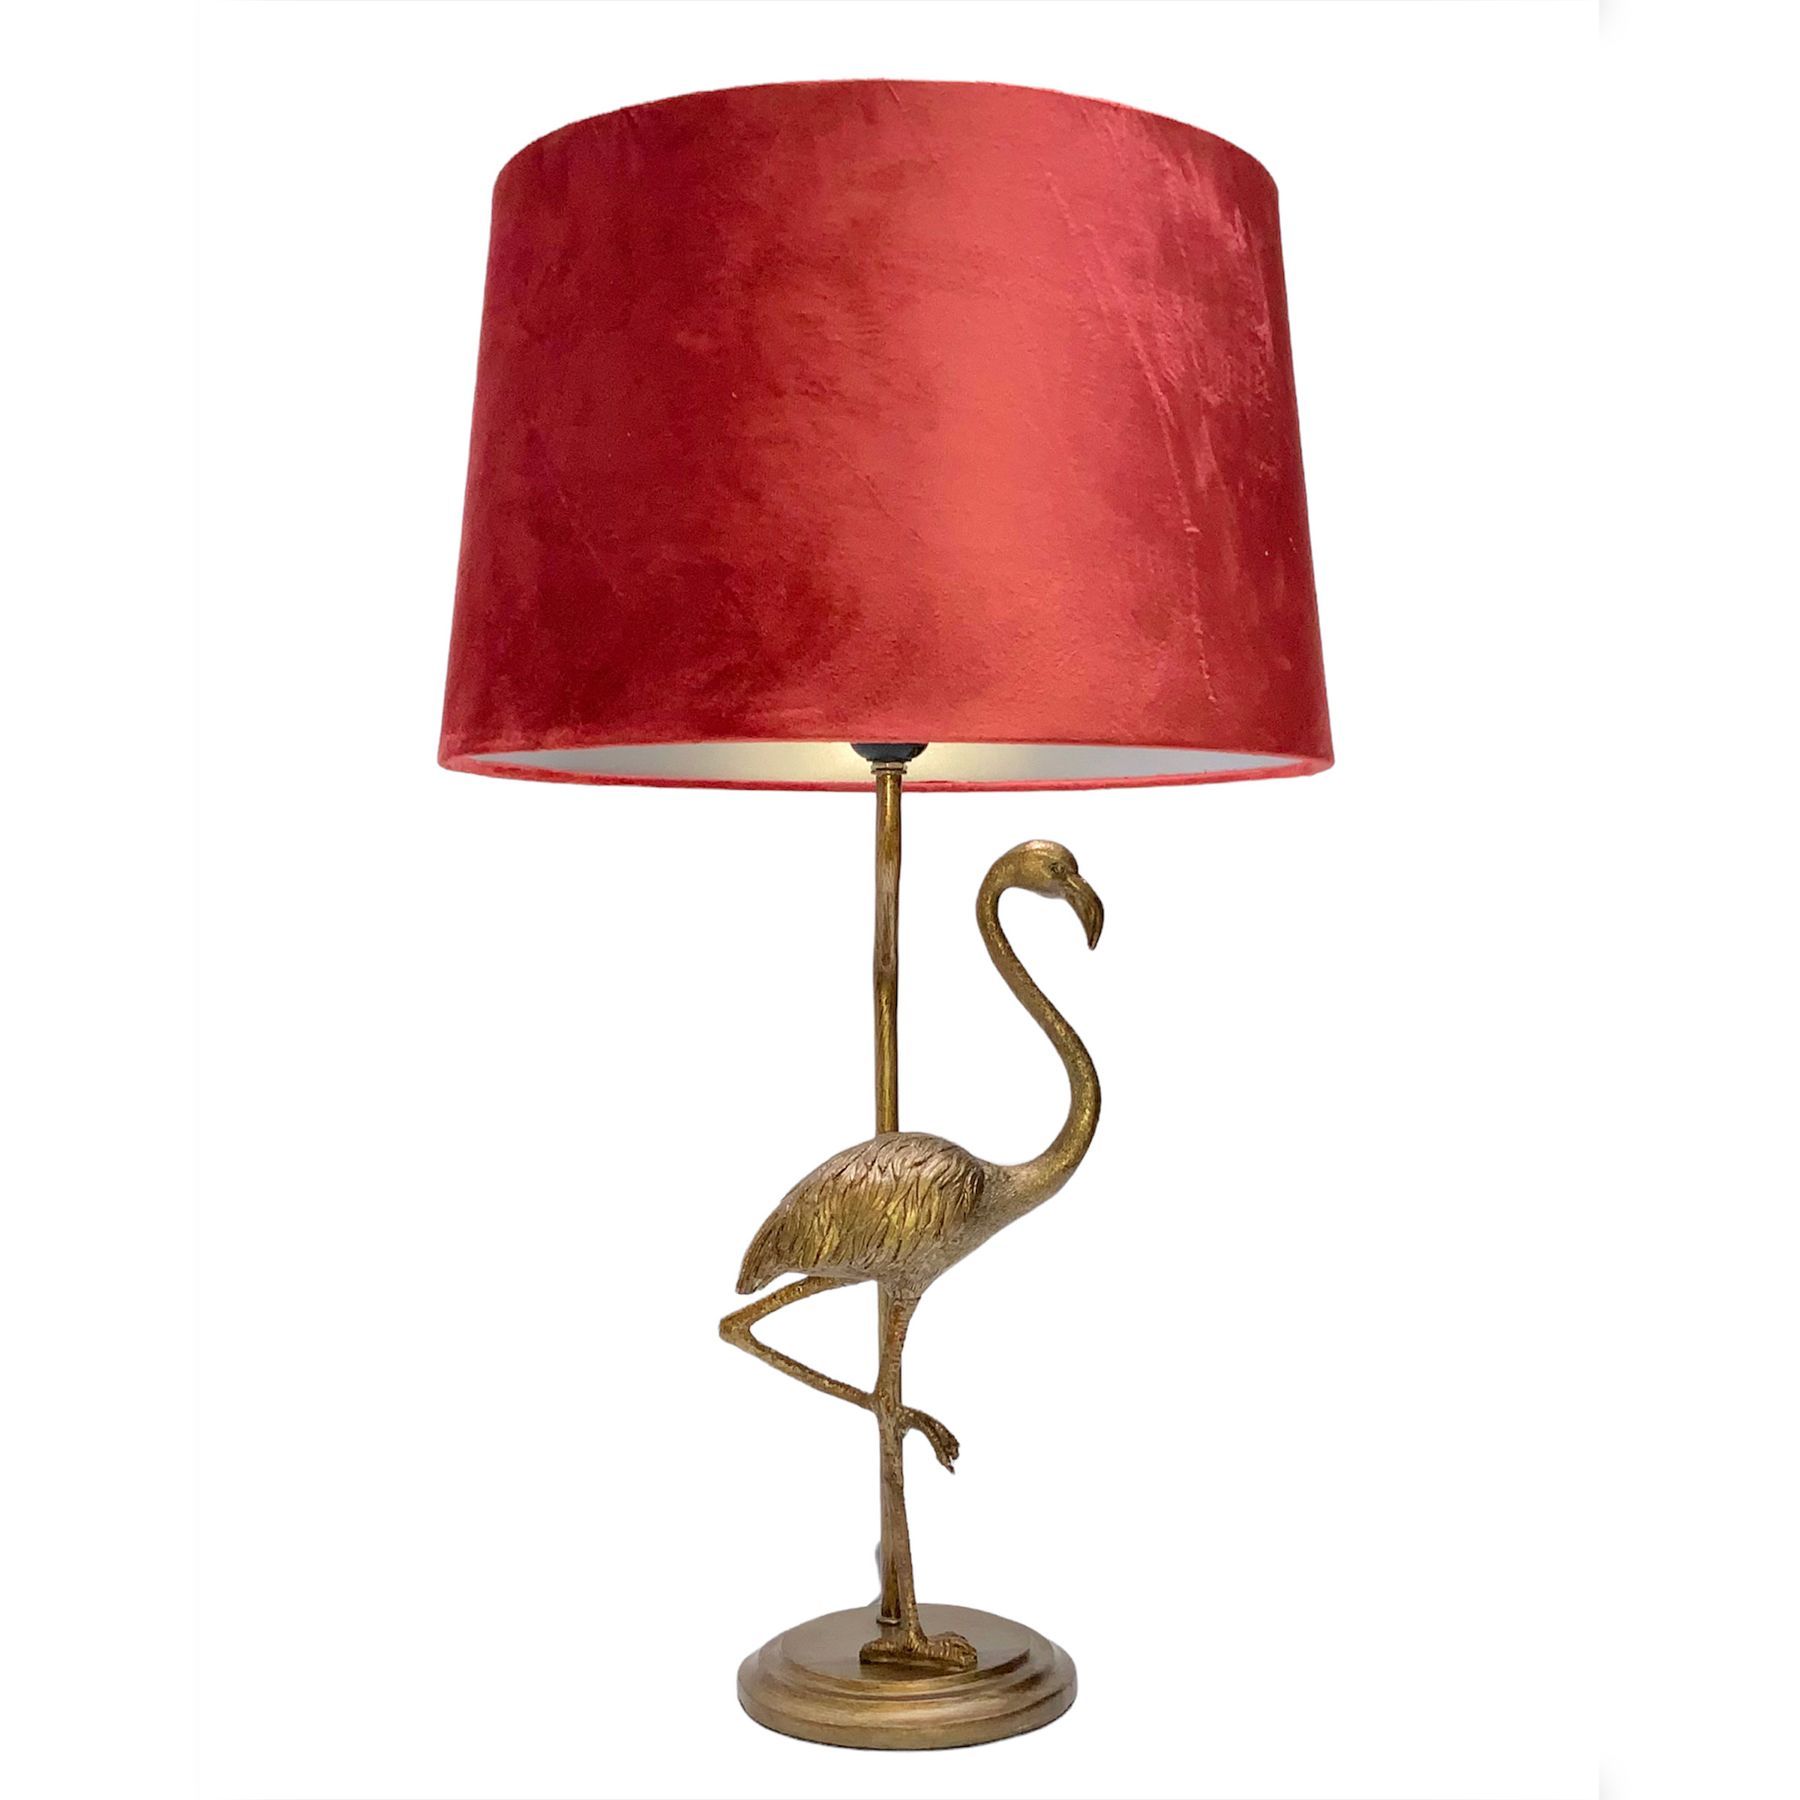 Antique Silver Flamingo Lamp With Coral Velvet Shade